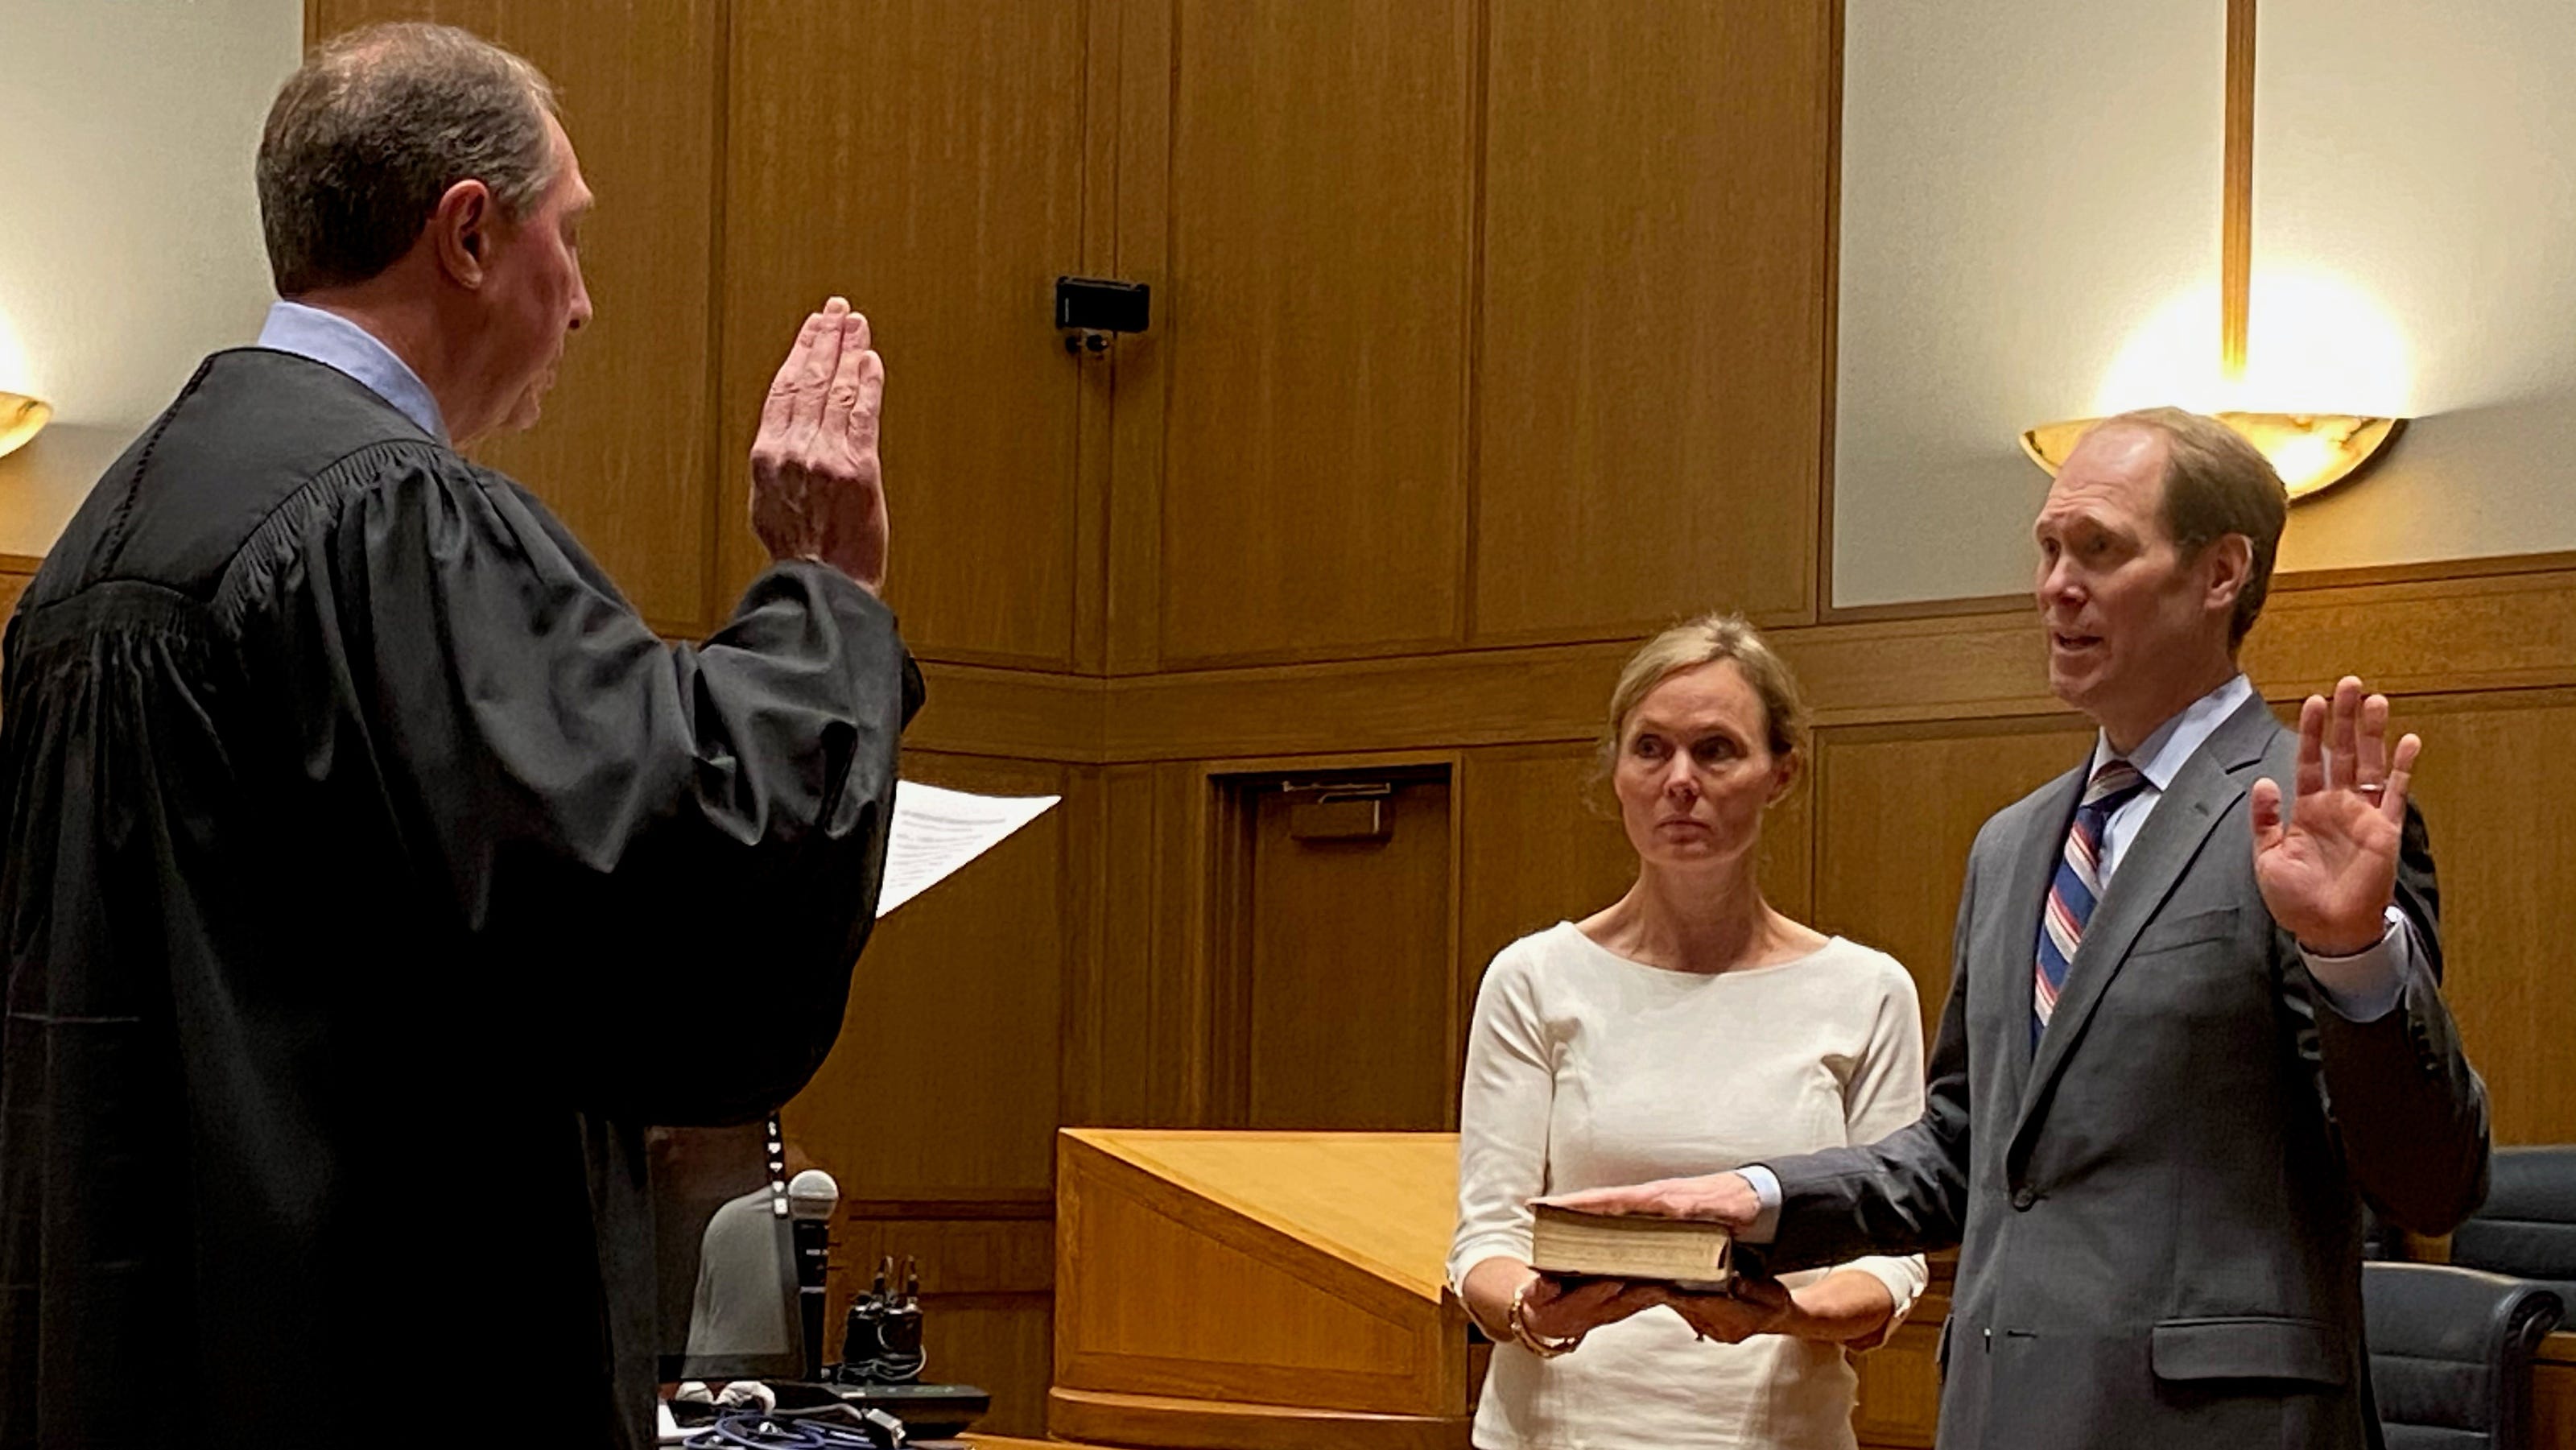 Newest judge sworn in to 7th Circuit Court replaces Amy Coney Barrett